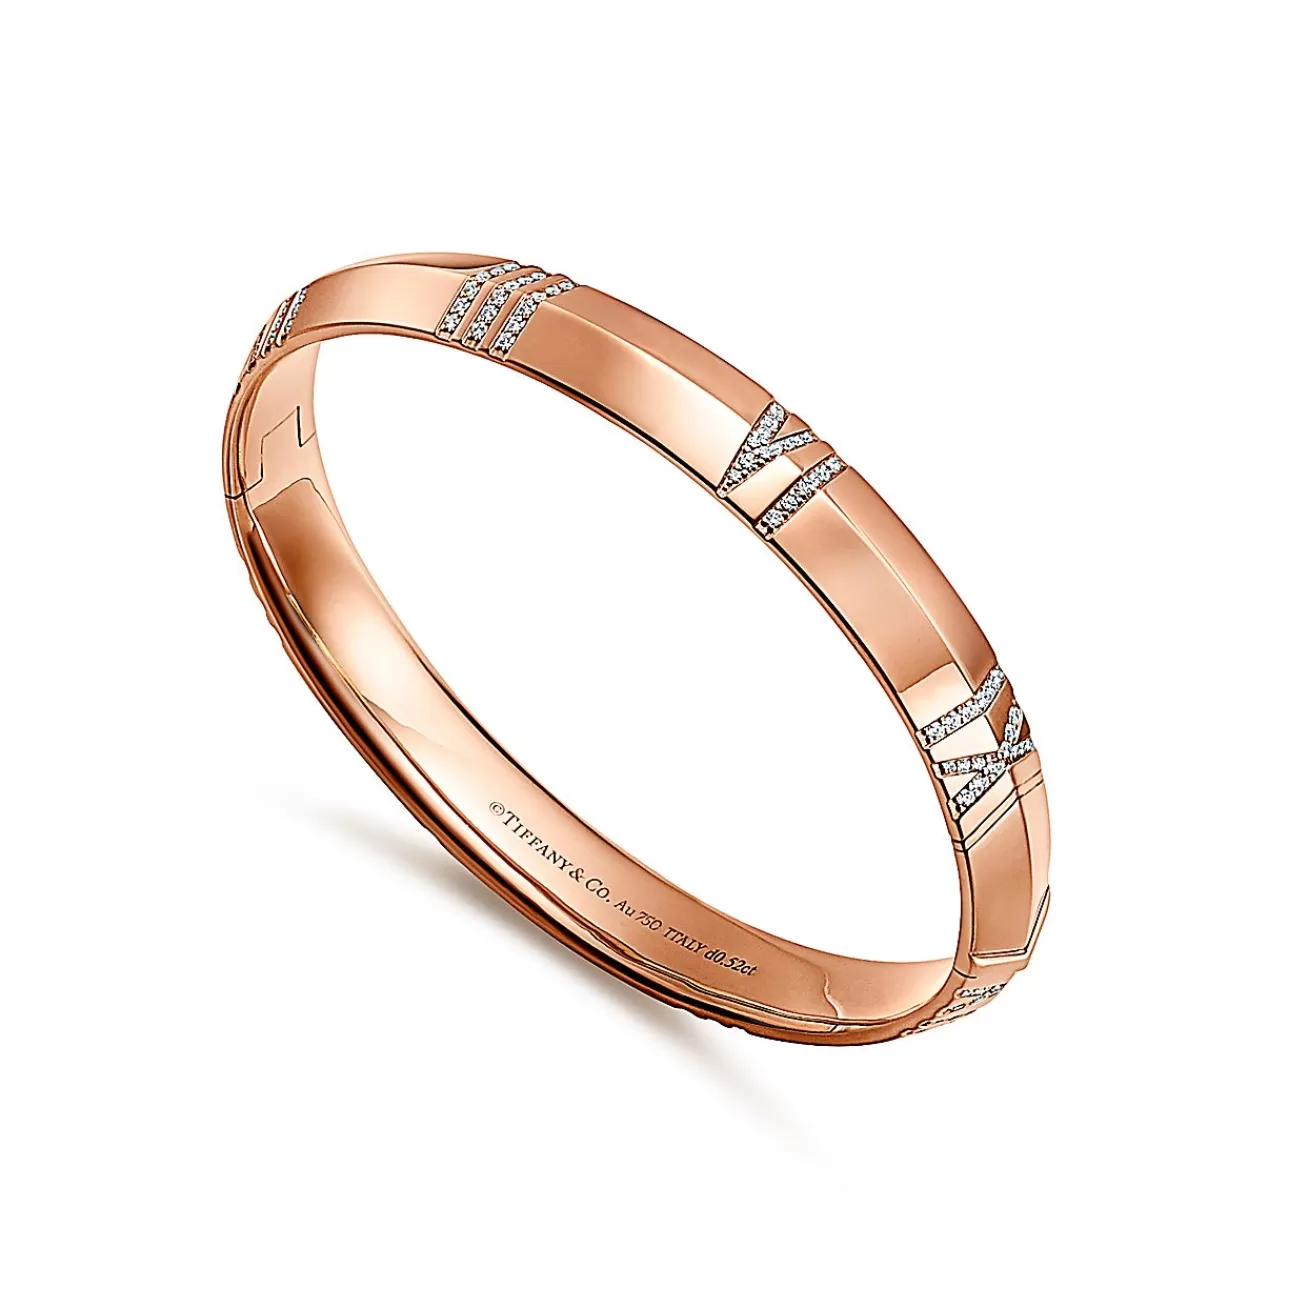 Tiffany & Co. Atlas® X Closed Wide Hinged Bangle in Rose Gold with Diamonds | ^ Bracelets | Men's Jewelry